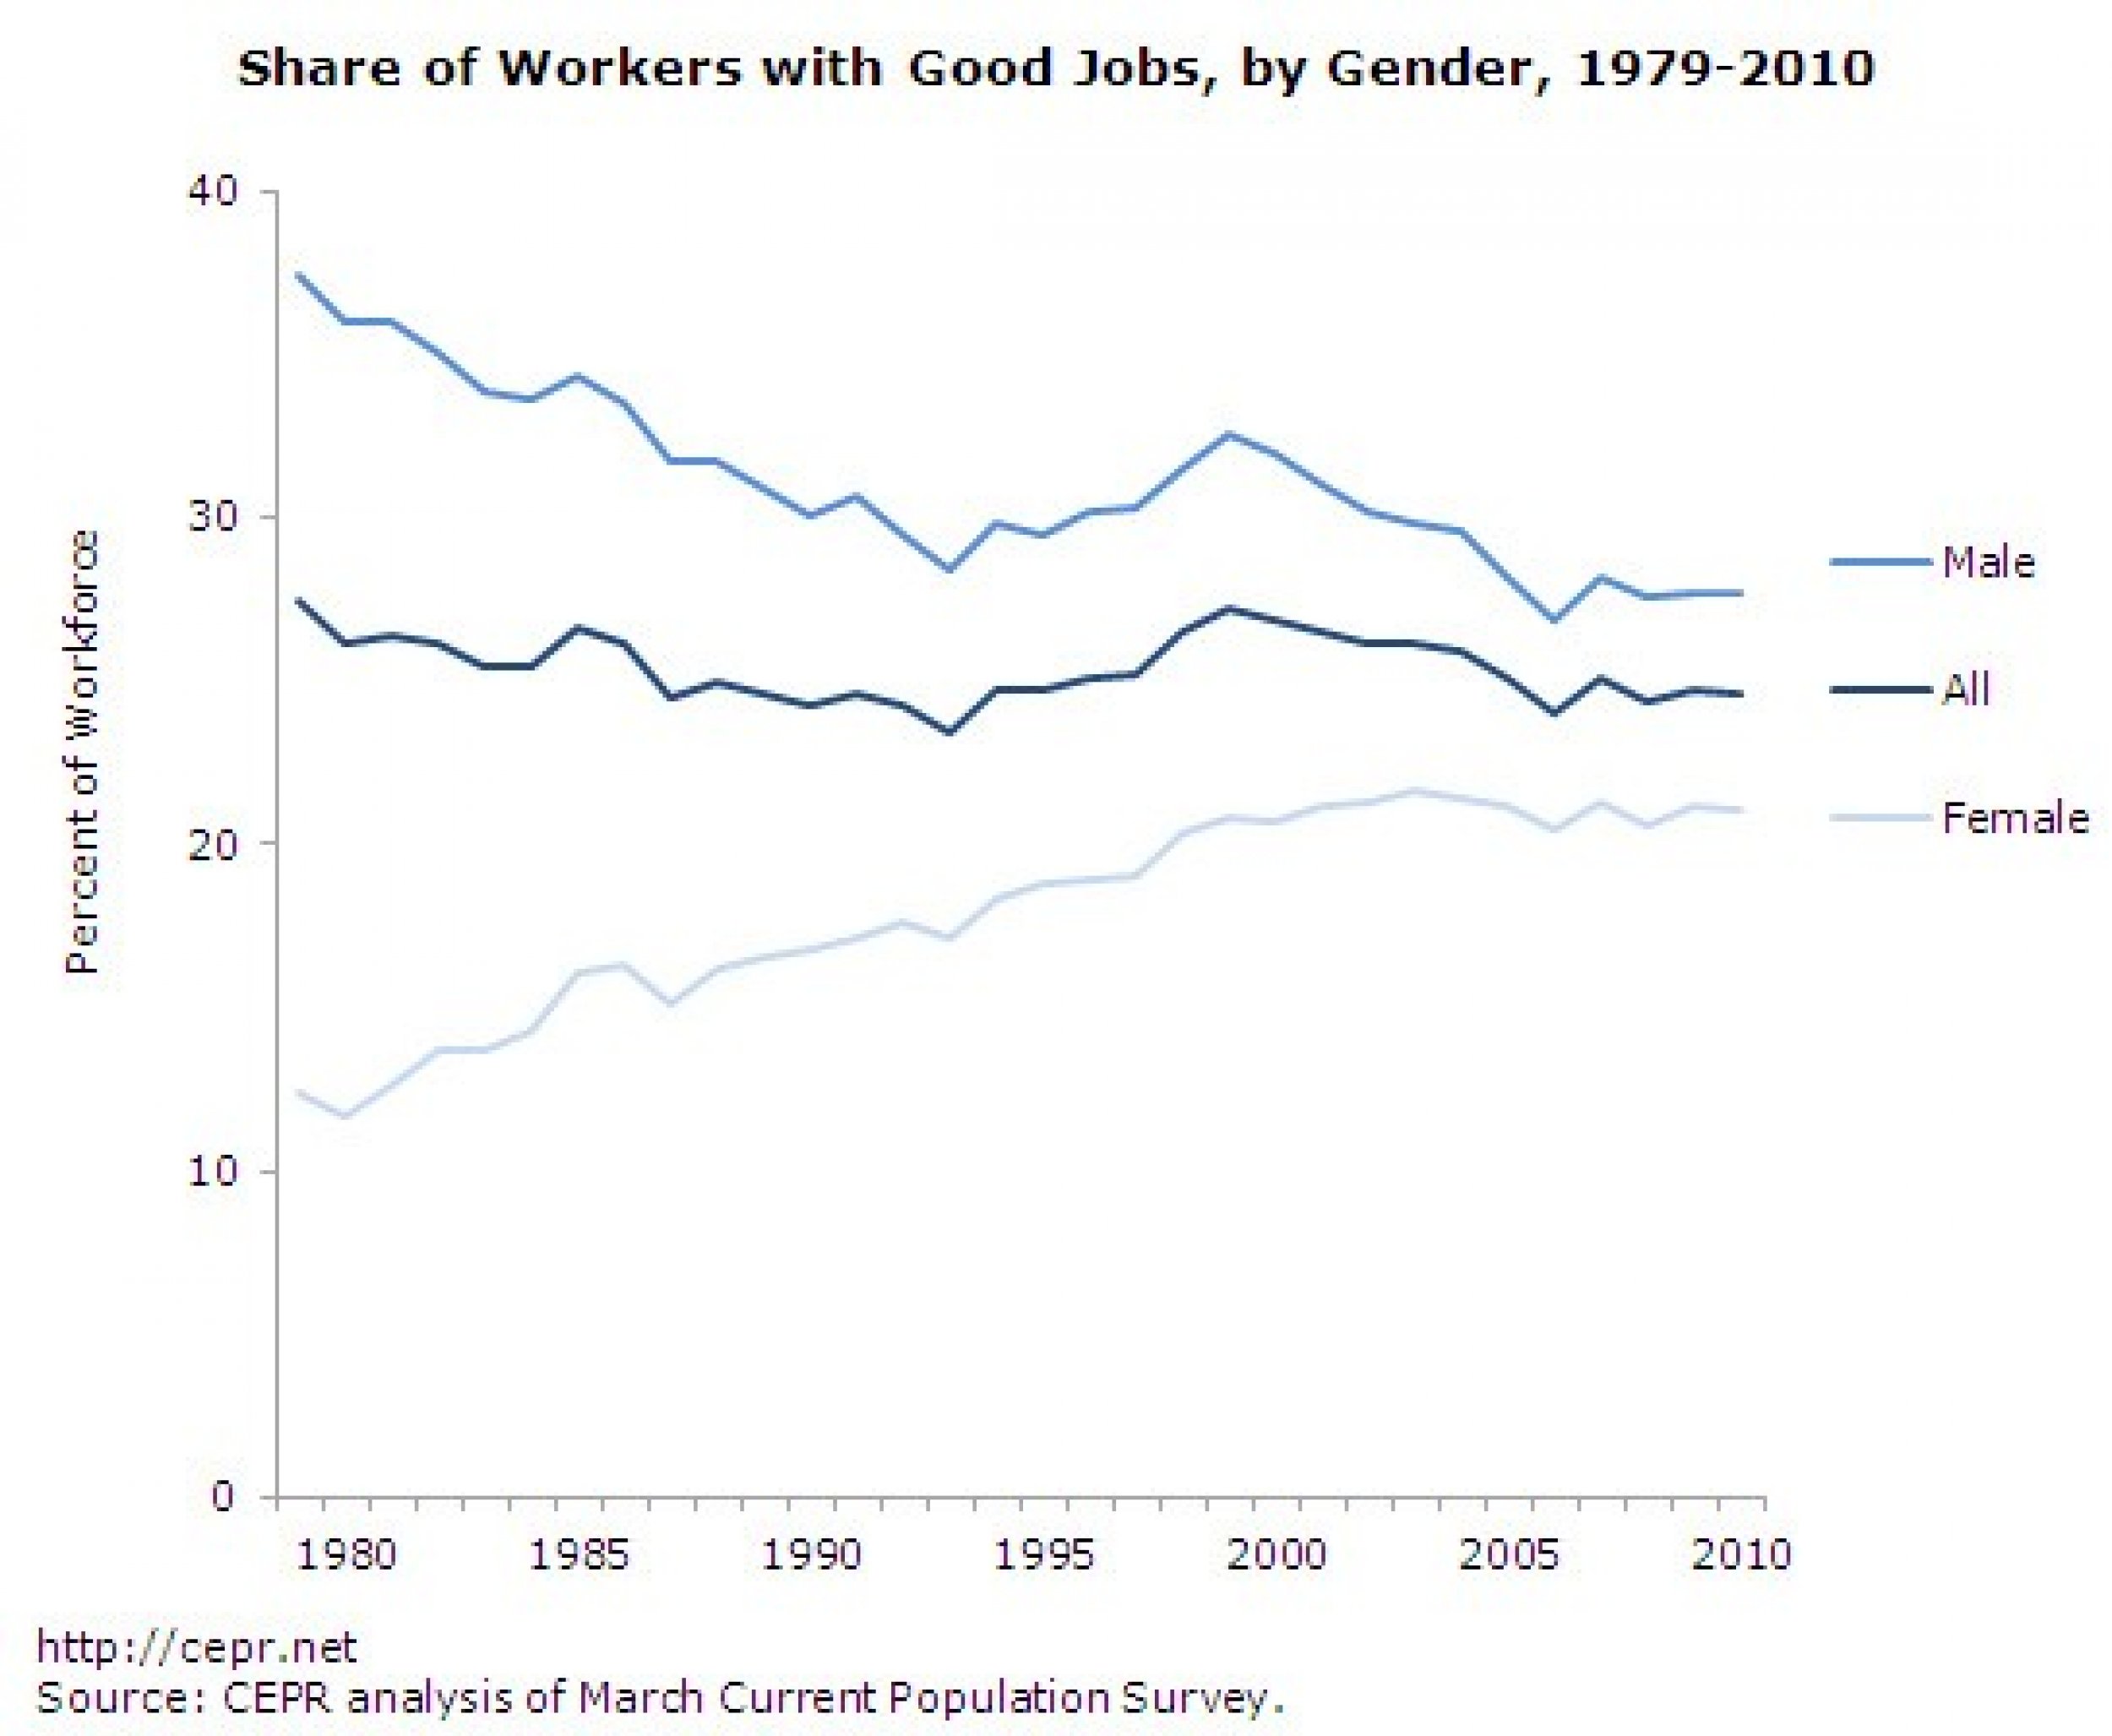 Share of Workers with Good Jobs, by Gender, 1979-2010